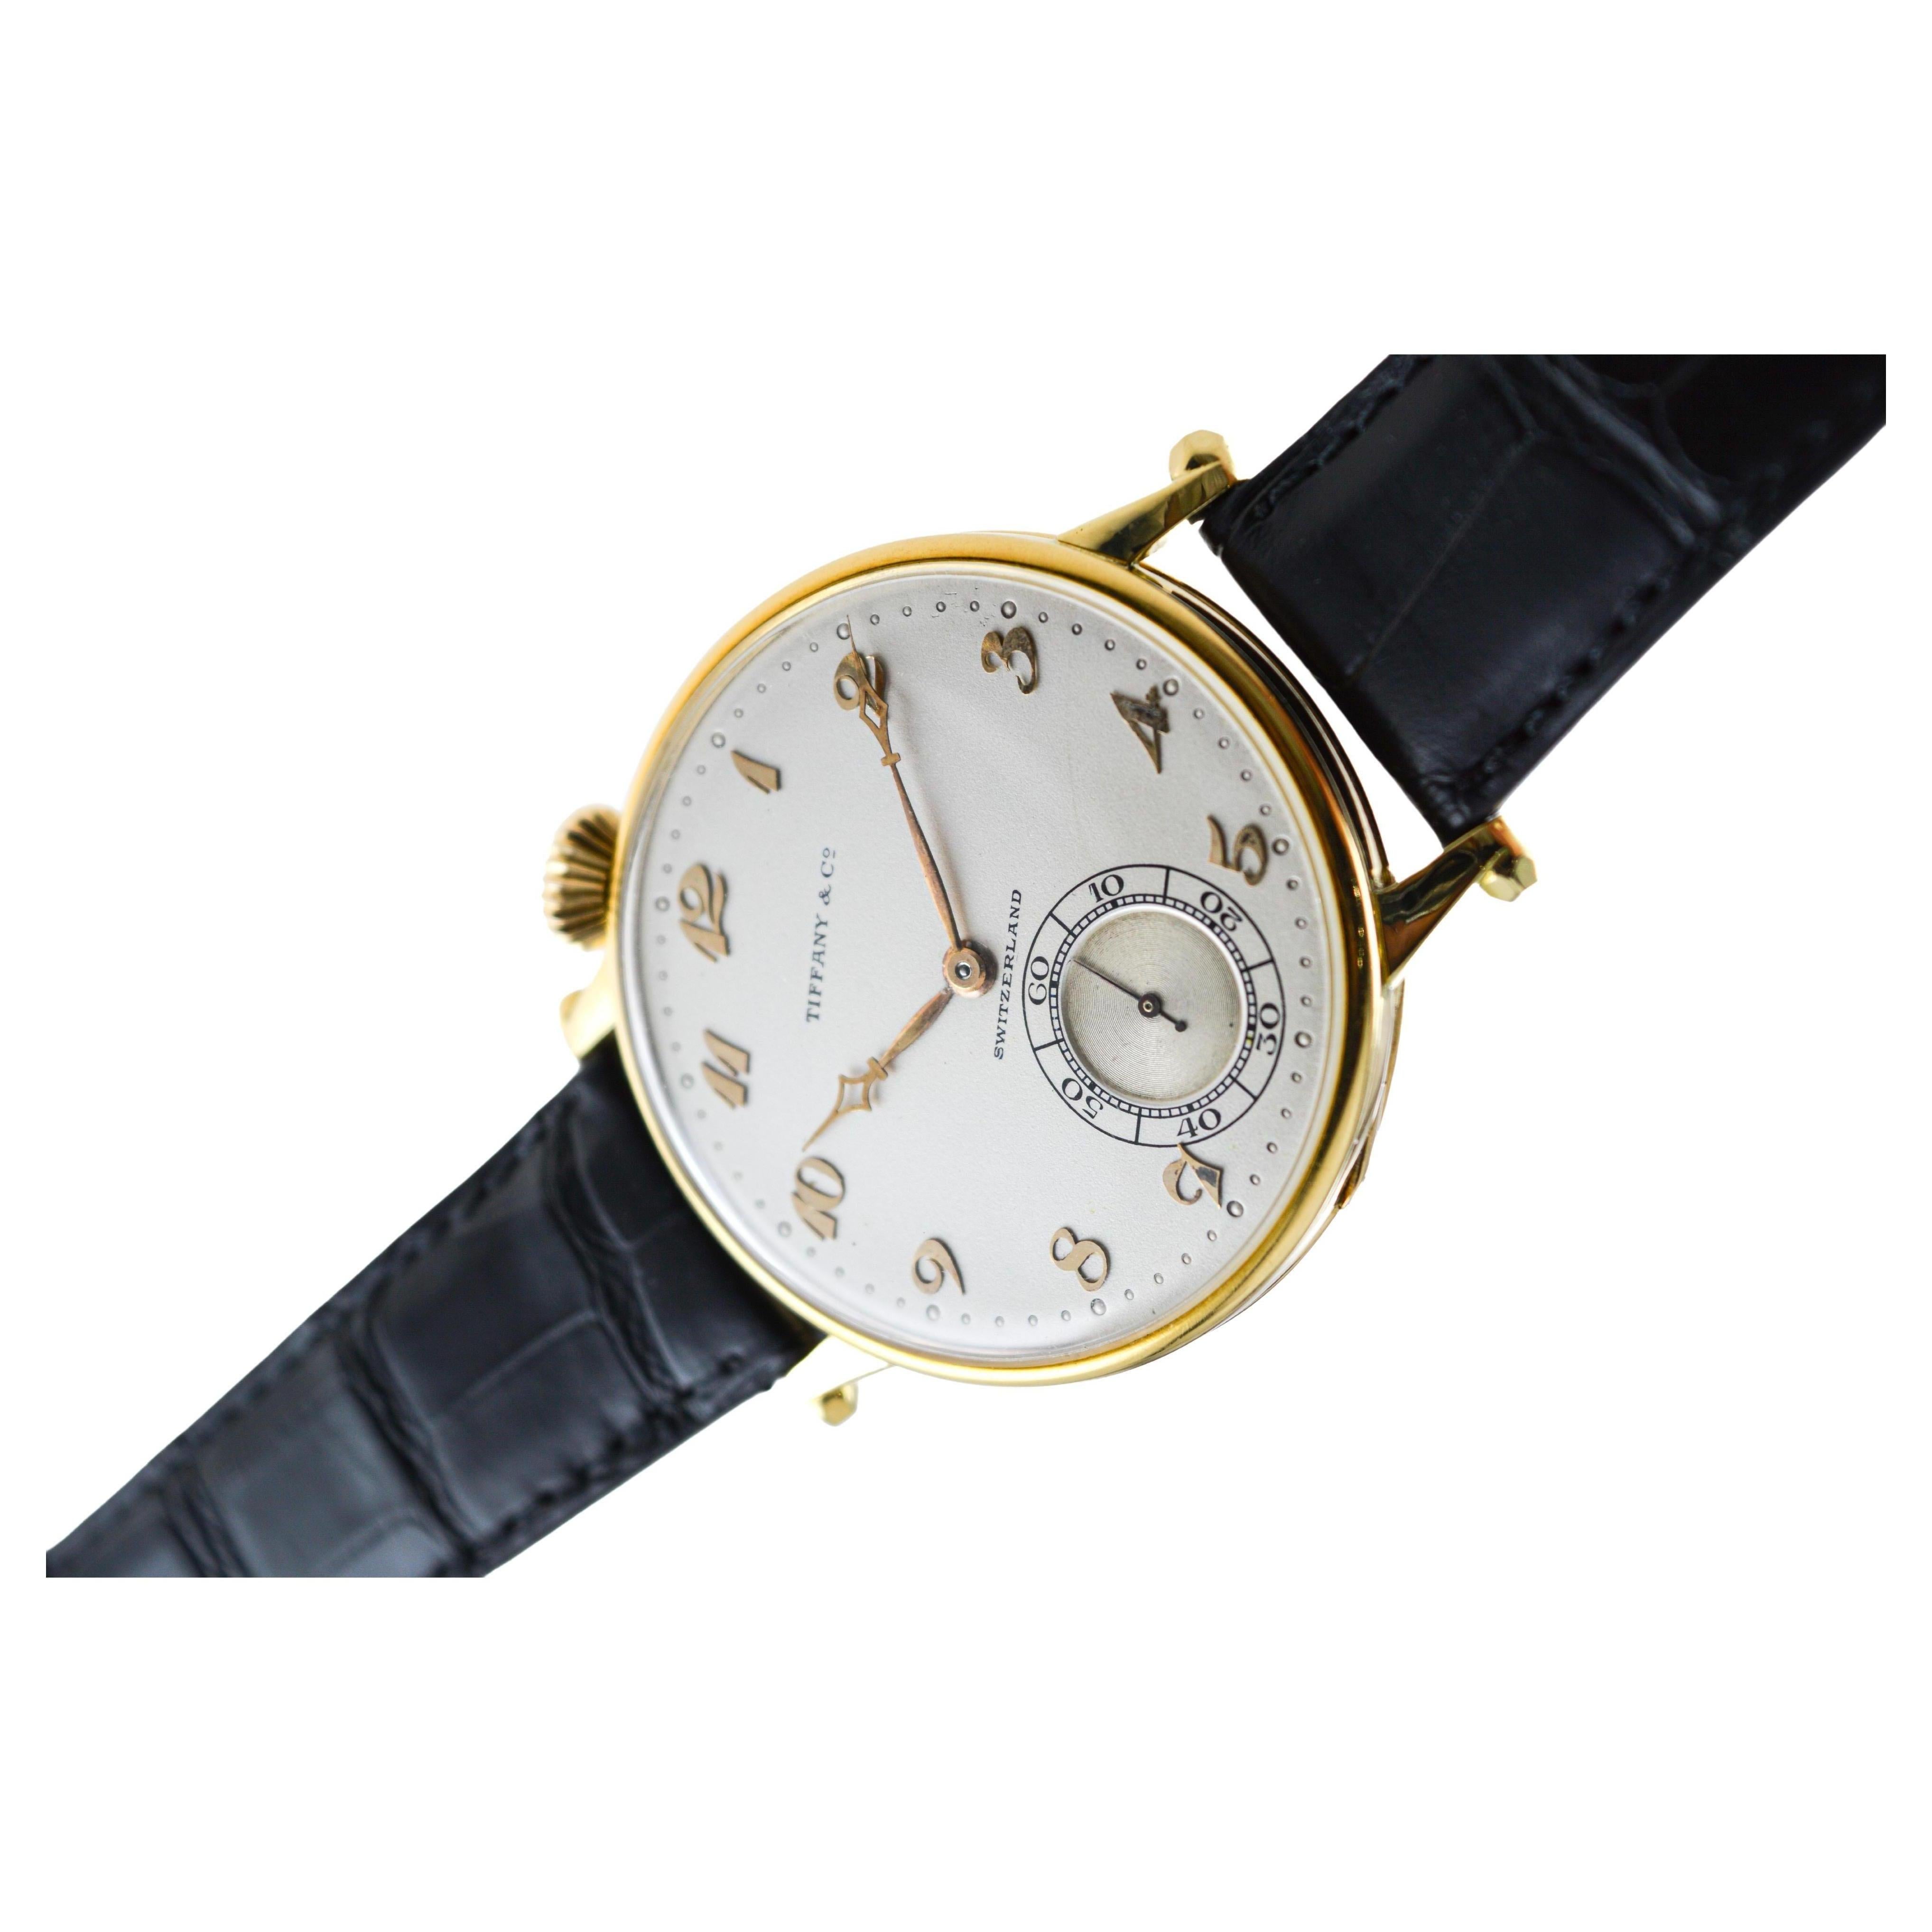 Agassiz 18Kt. Gold Oversized Watch for Tiffany & Co. Stern Freres Dial 1920's For Sale 3